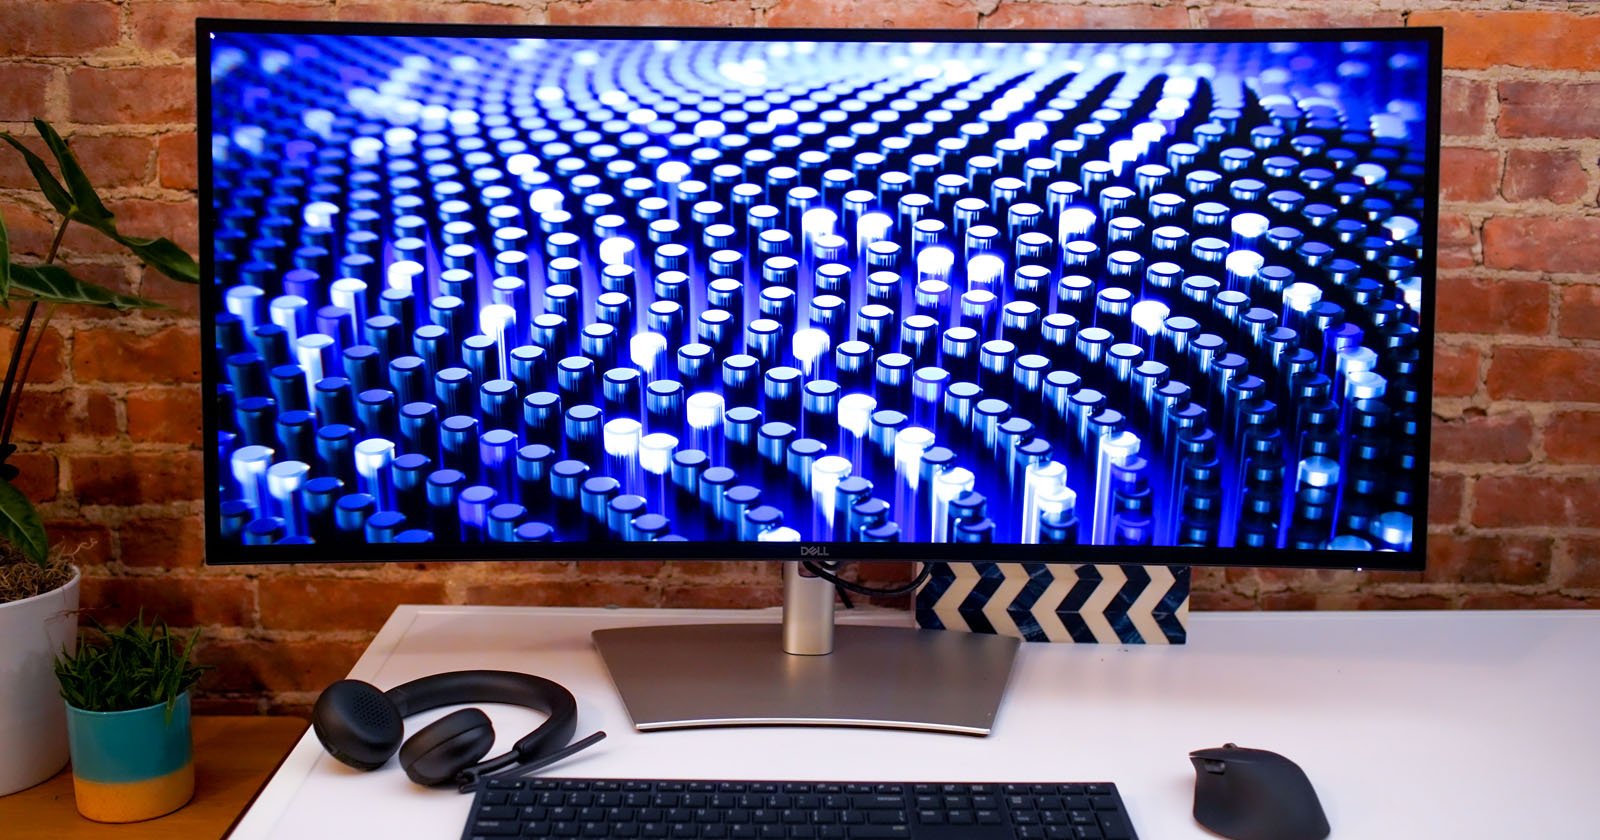  dell reveals big 40-inch ultrawide monitor content 